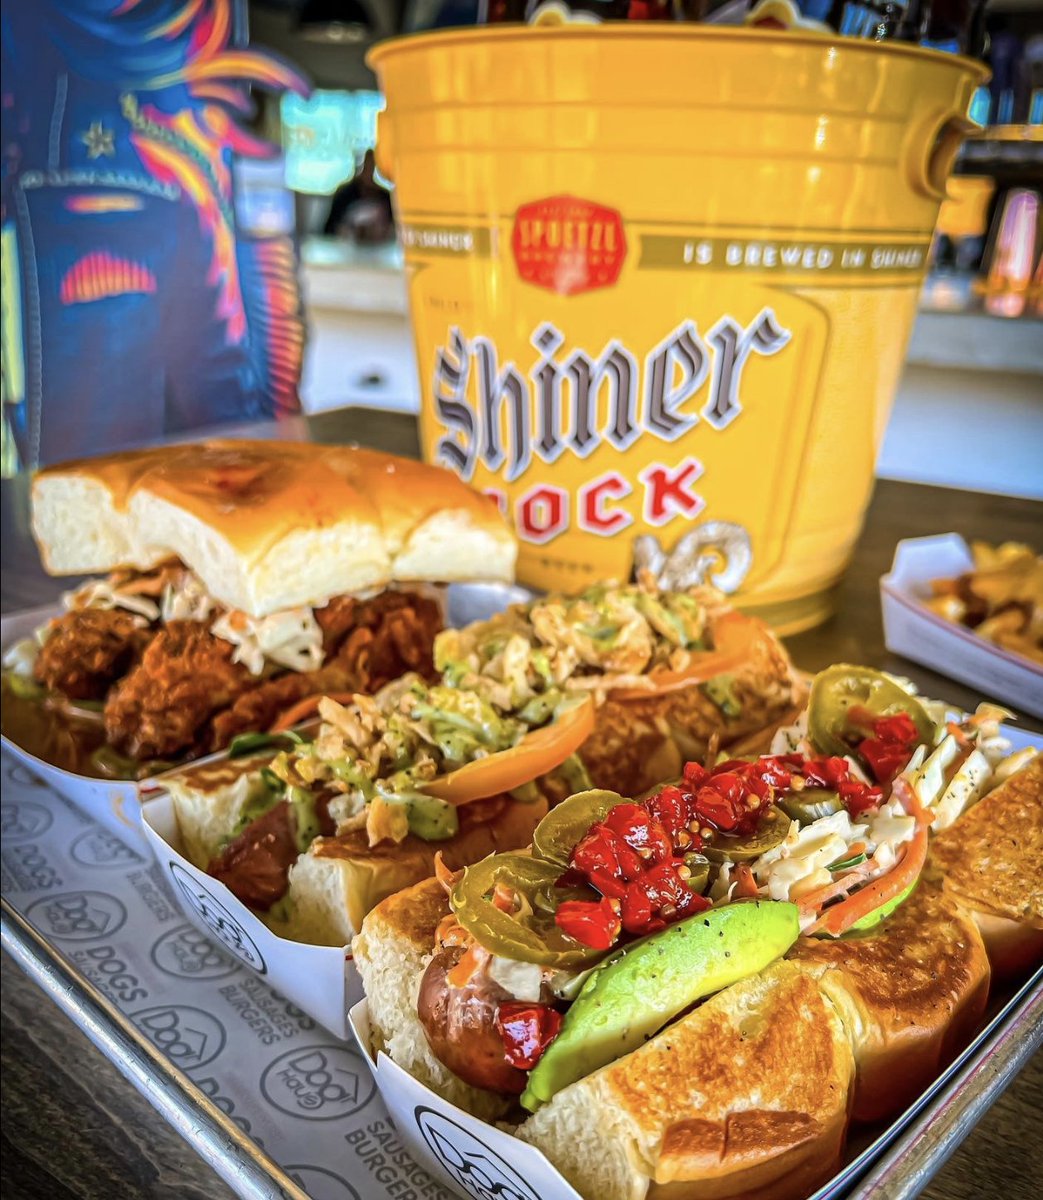 Cool down your hot dogs with Shiner Bock 🌭🍺 Grab a pack to pair with your fall favorites.

#Shiner #ShinerBock #Hotdogs #TexasEats #Foodgram #Beer #Texas
📸: @eldereats